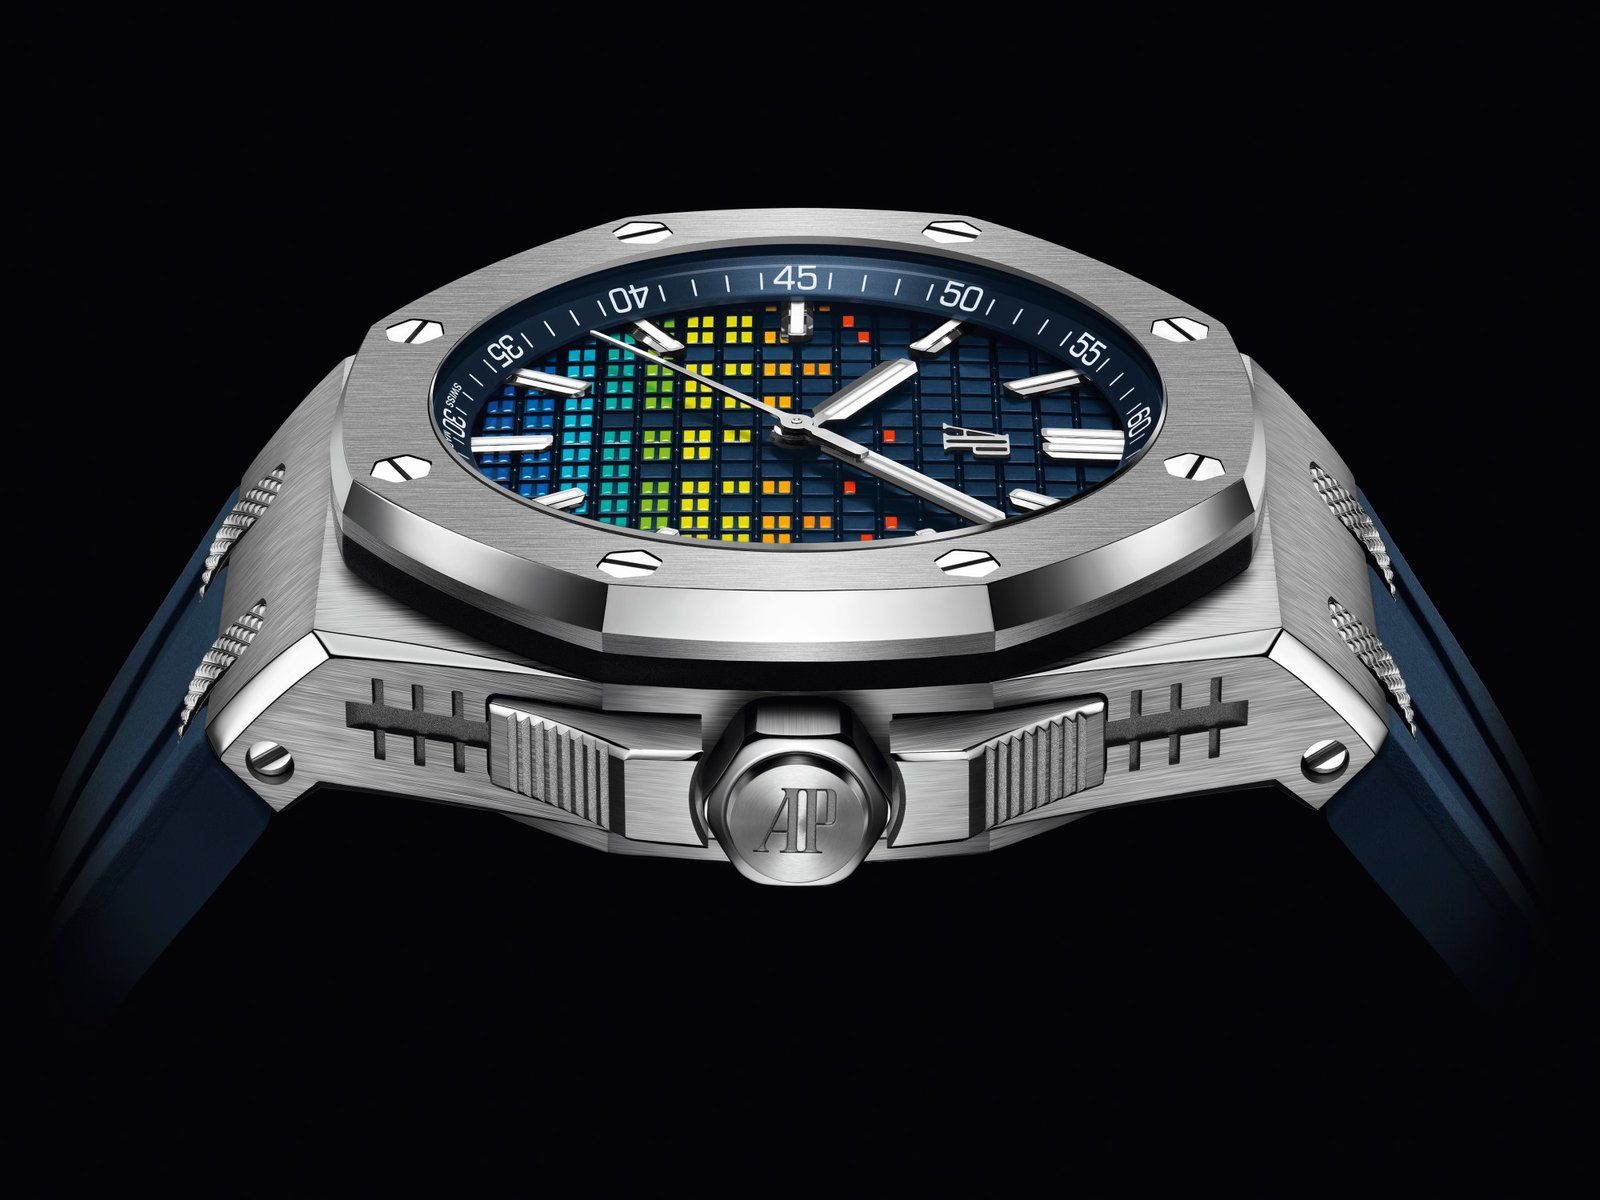 Testing The Power Of Music With Audemars Piguet’s New Royal Oak Offshore: Decked In The Colours Of Rhythm